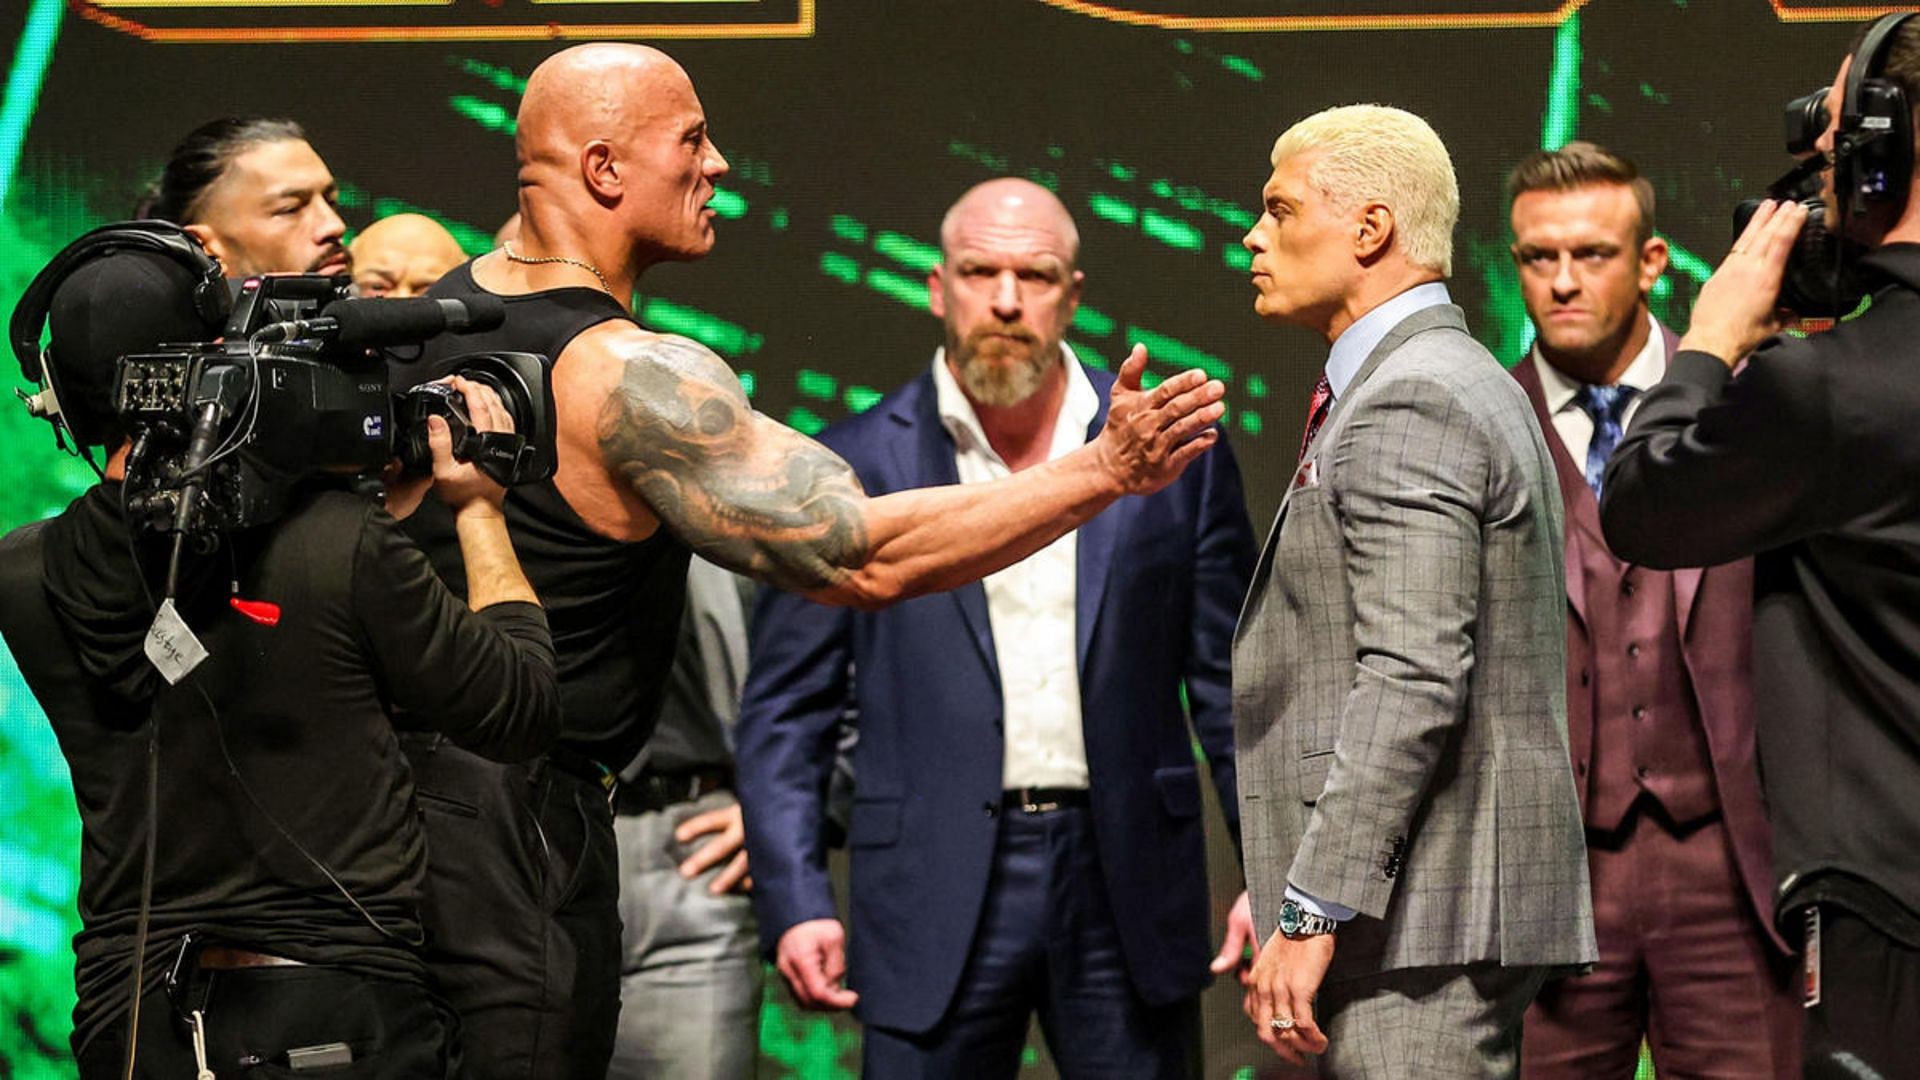 The Rock slapped Cody Rhodes at the WWE WrestleMania XL Kickoff event